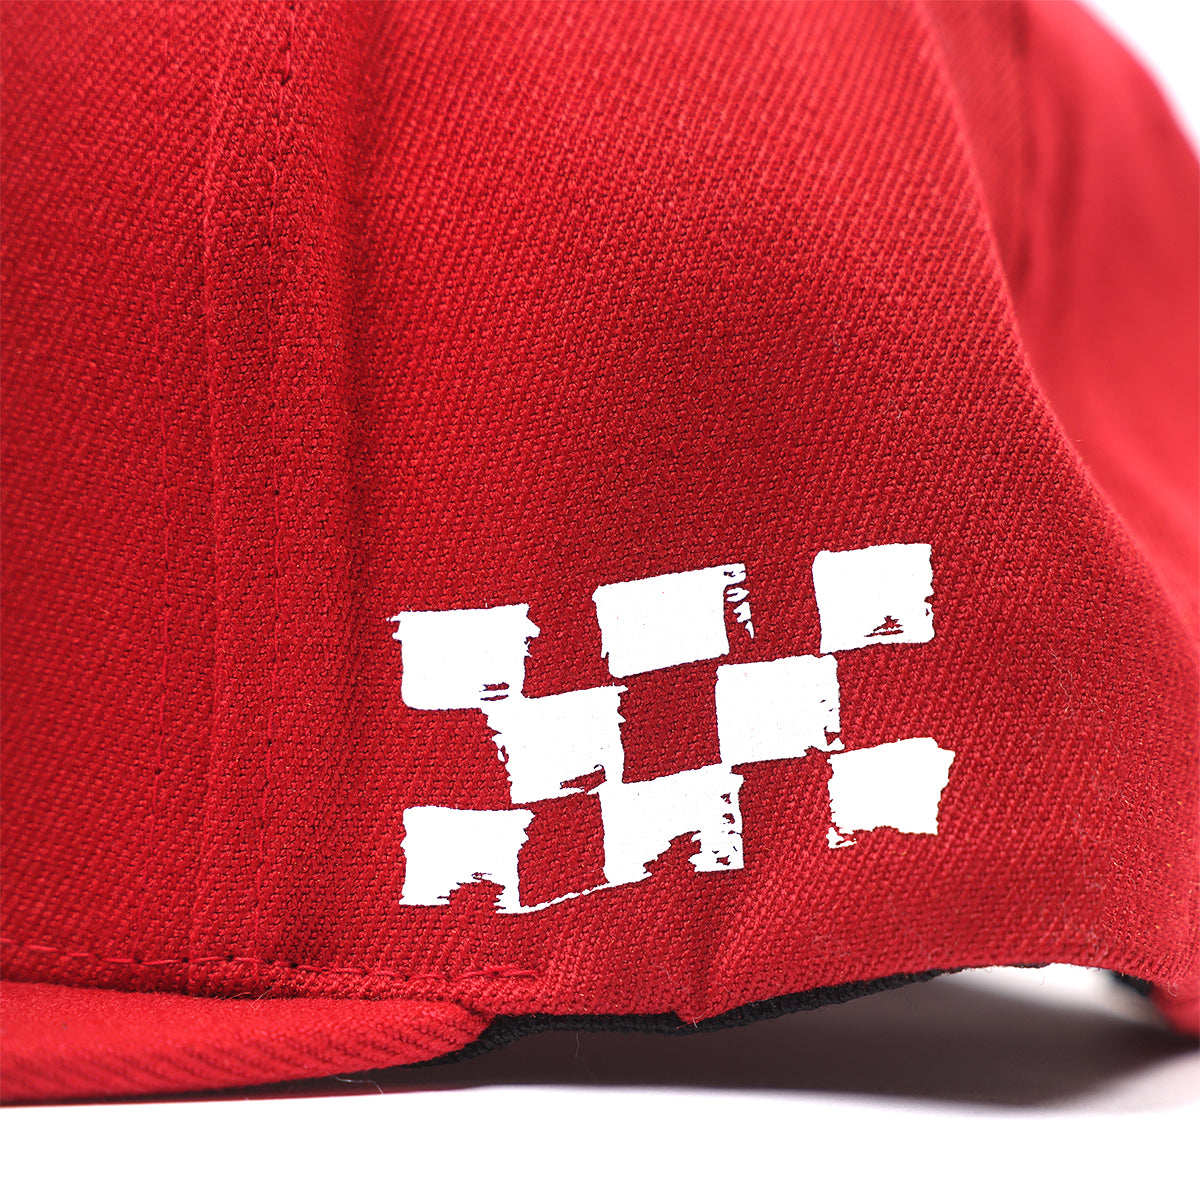 Alkyd Hat - Red